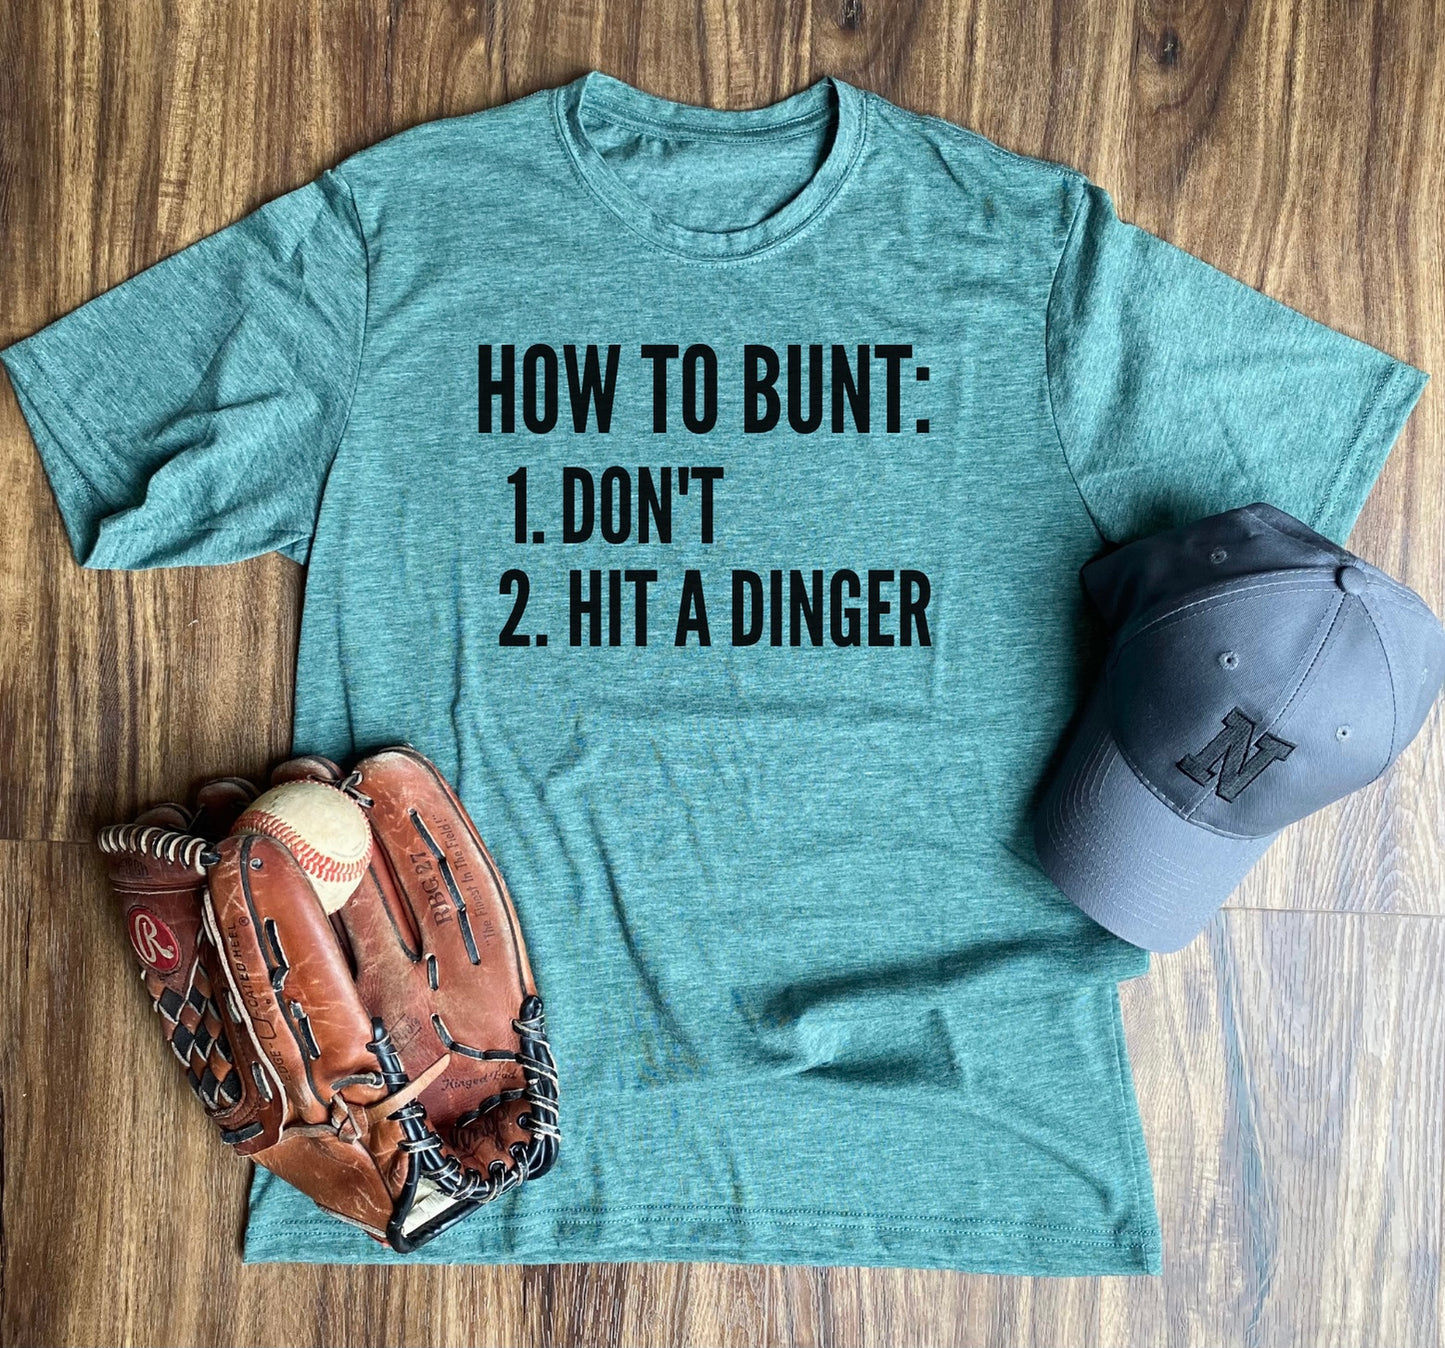 How to Bunt Shirt